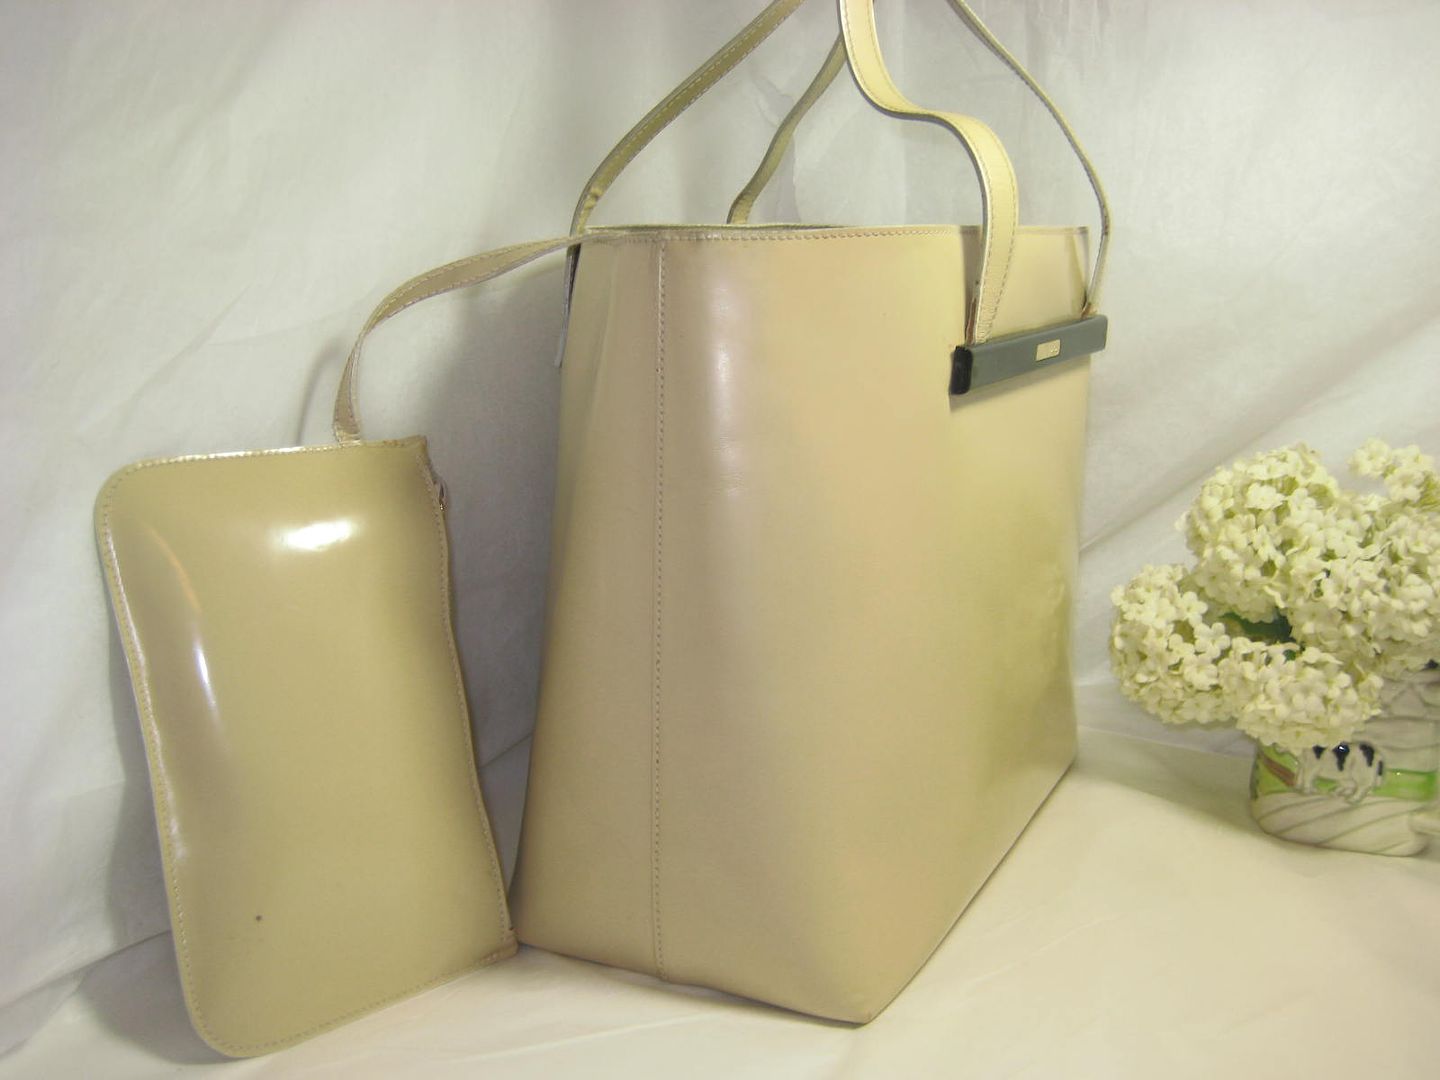 Vintage GUCCI Cream Leather Shoulder Bag with Pouch  